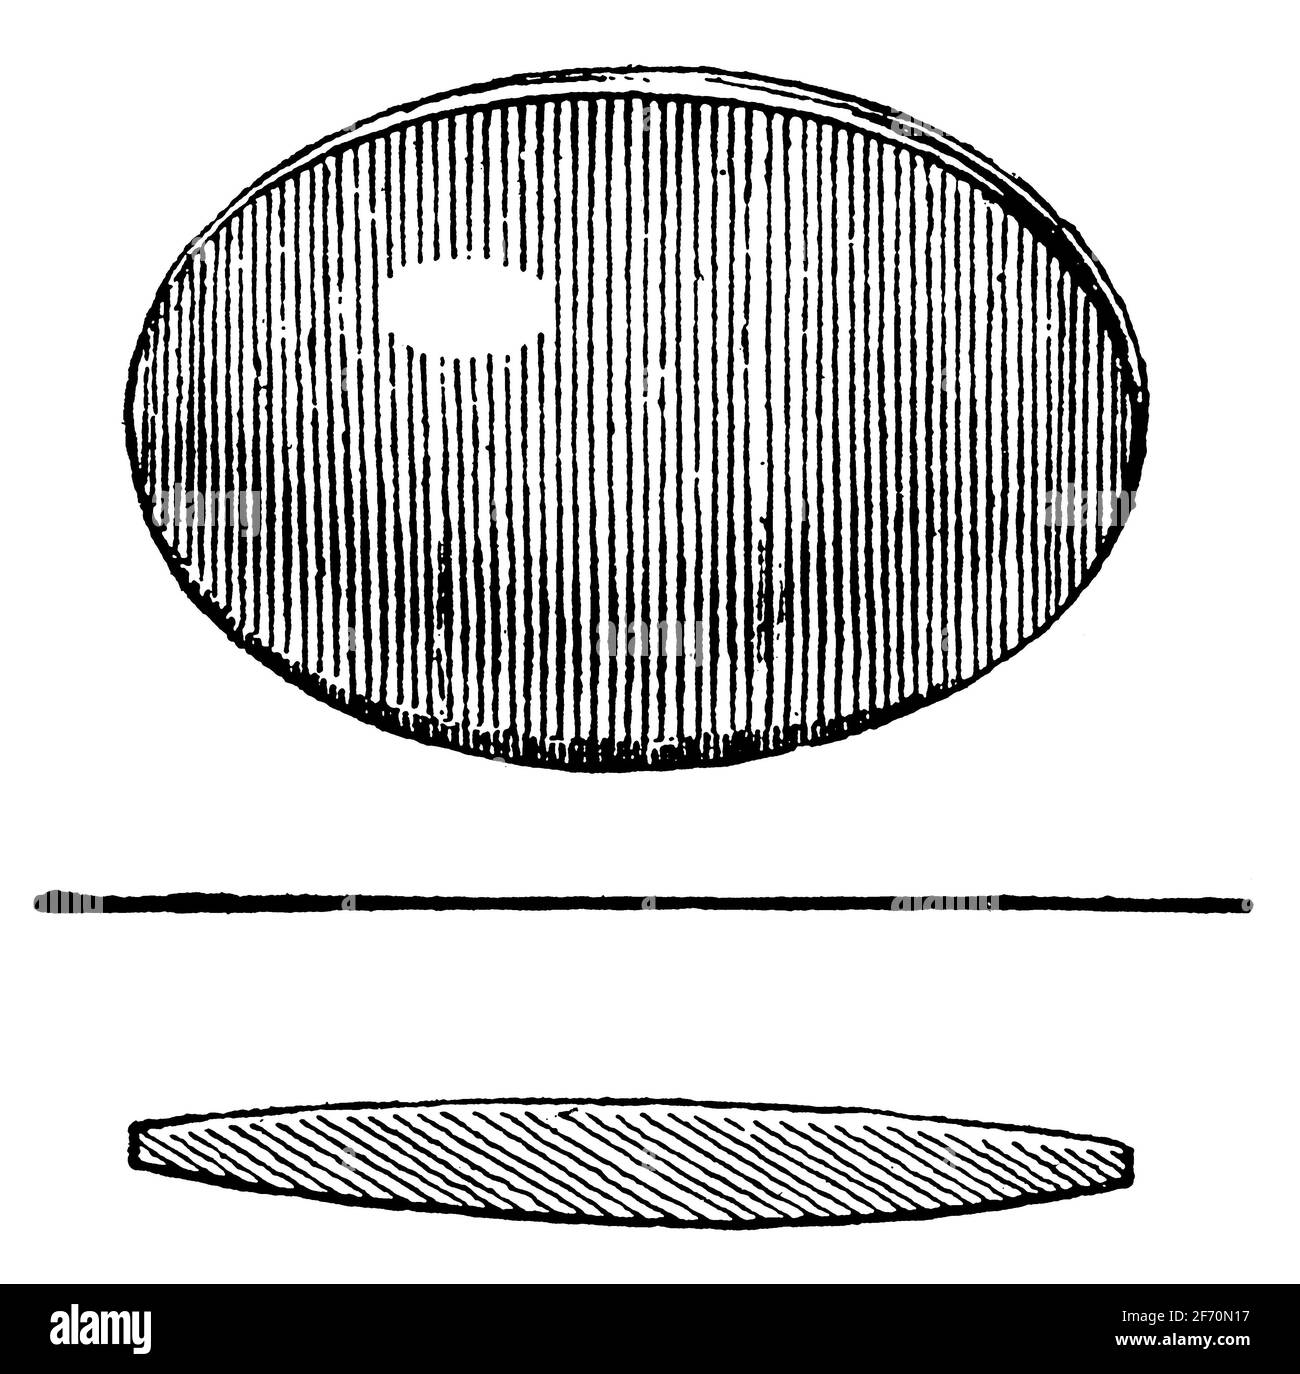 Concave-convex (periscopic) lens. Illustration of the 19th century. Germany. White background. Stock Photo